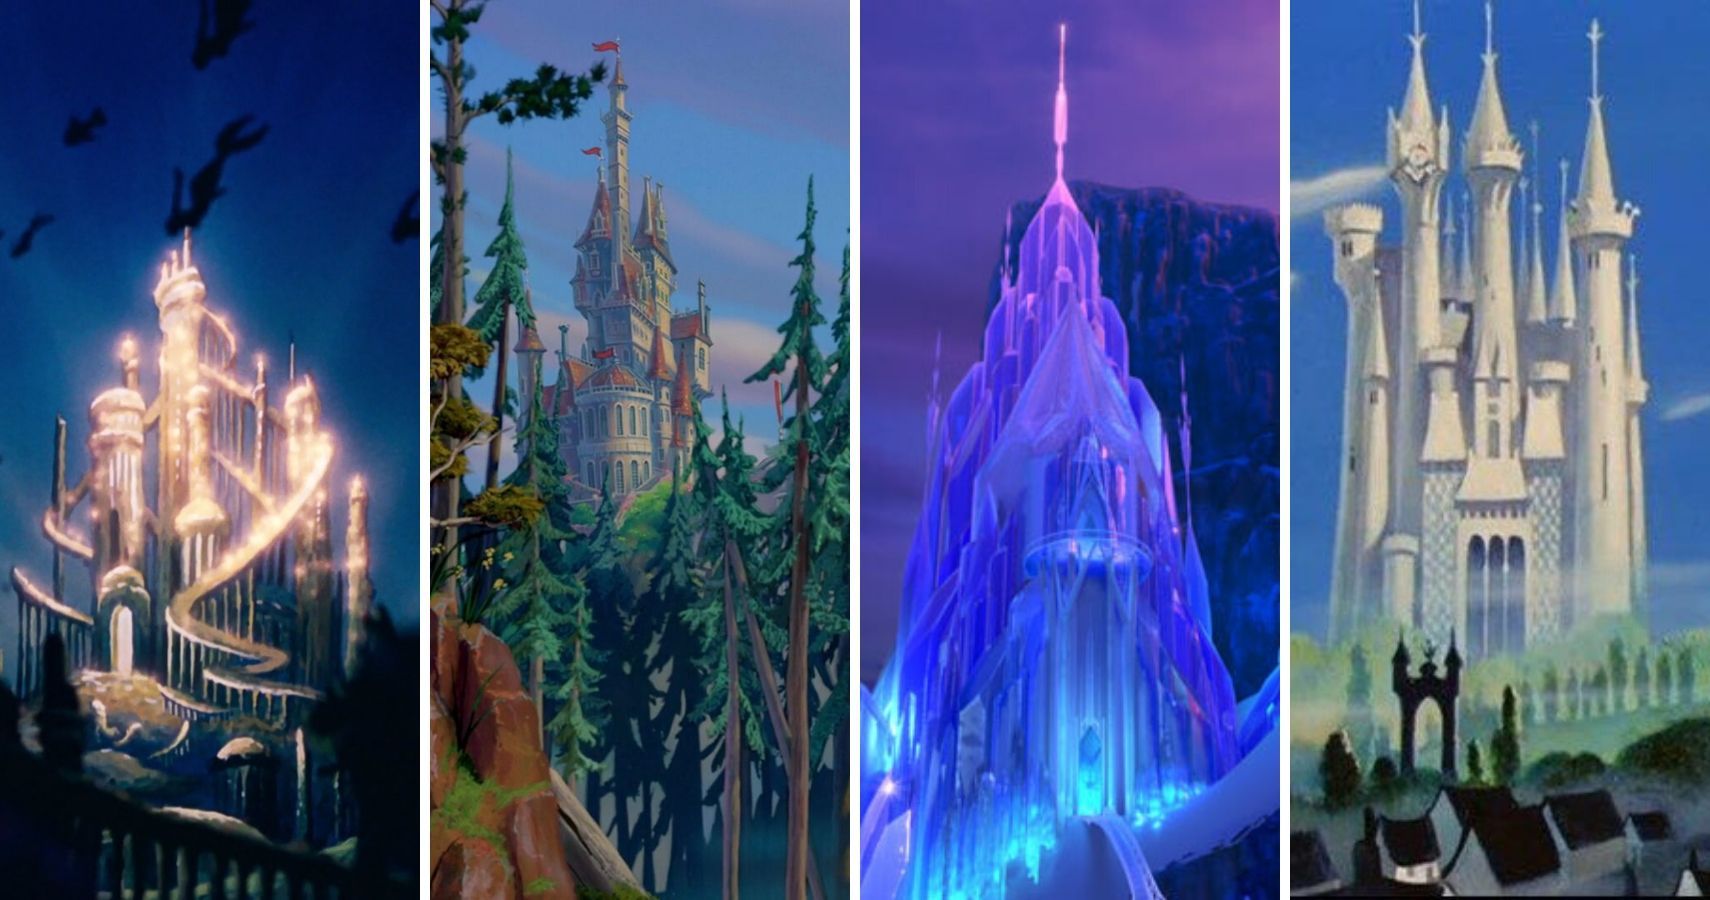 10 Disney Castles From The Movies To See IRL